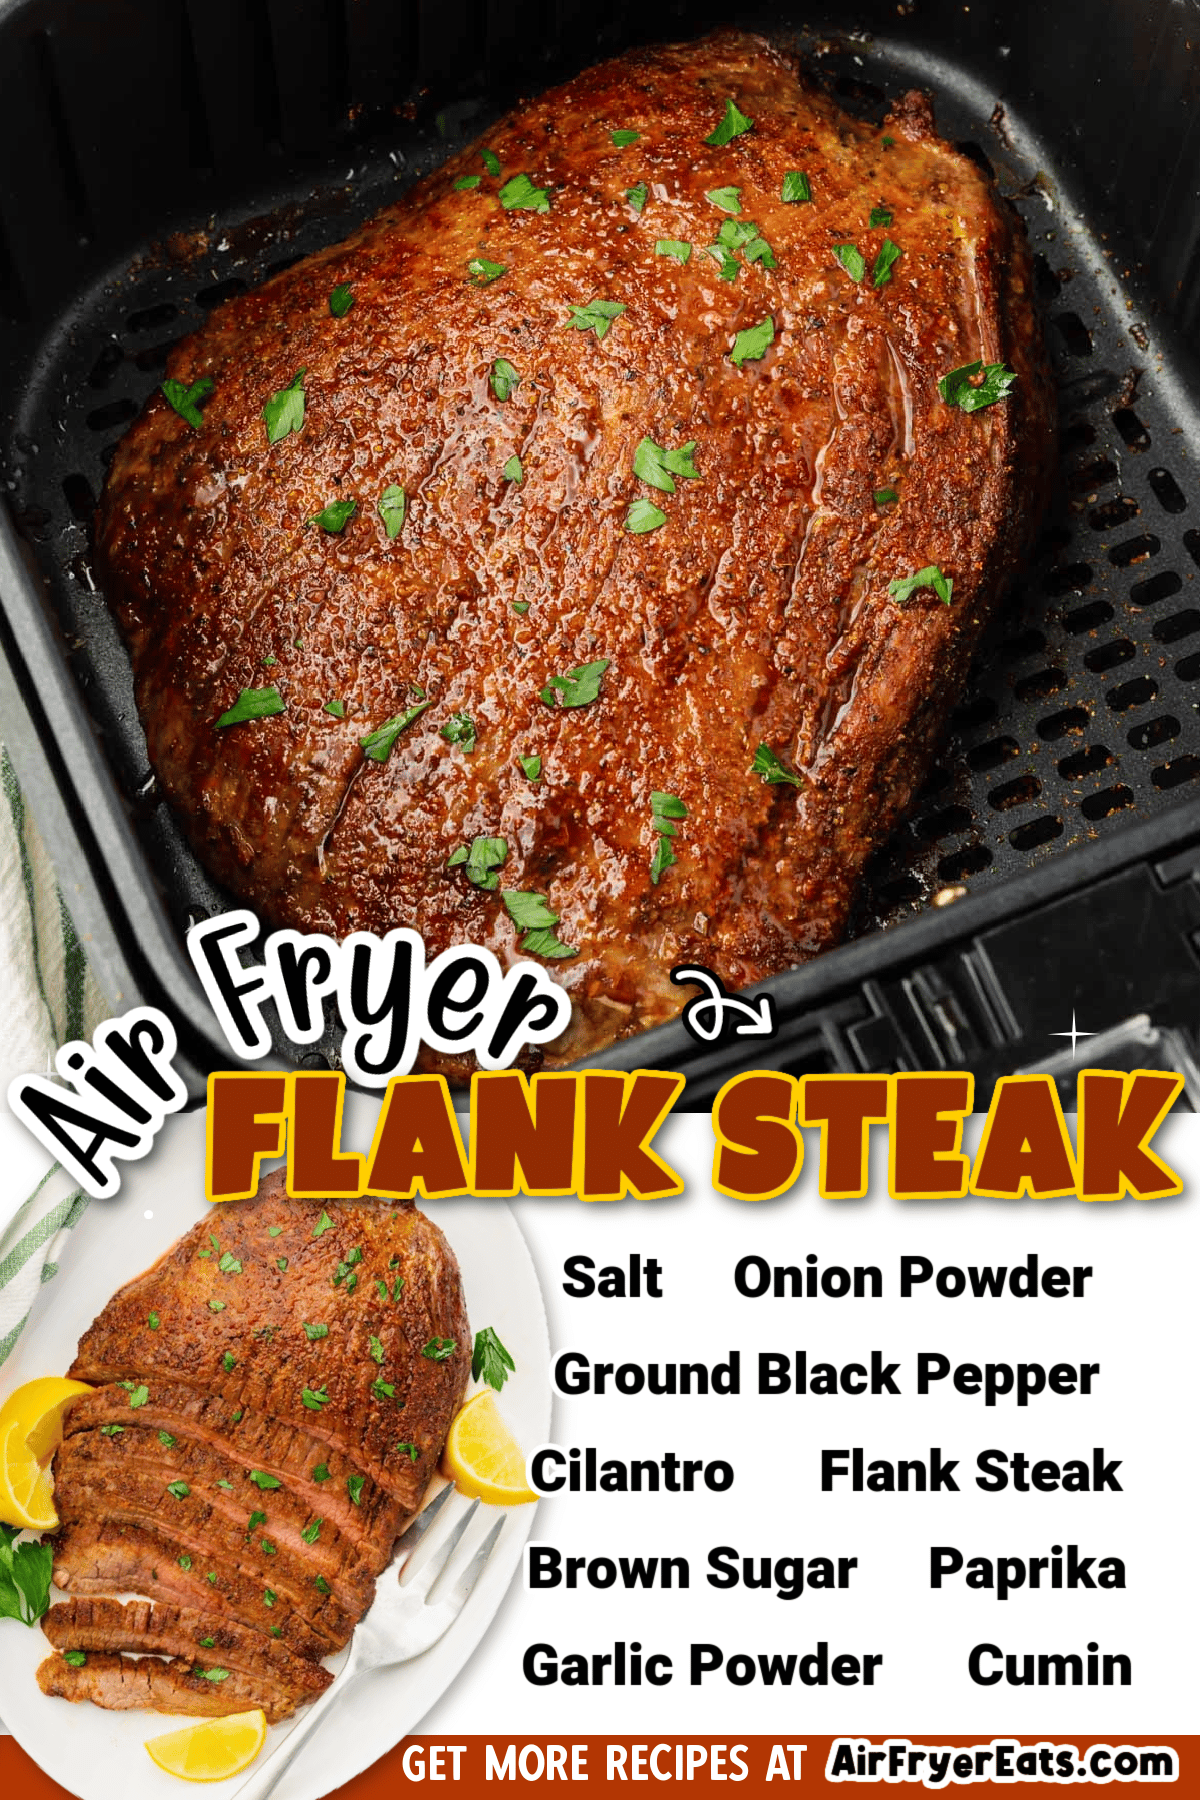 This Air Fryer Flank Steak Recipe is so easy! A flavorful dry rub turns an inexpensive cut of beef into a juicy steak in less than 20 minutes. via @vegetarianmamma